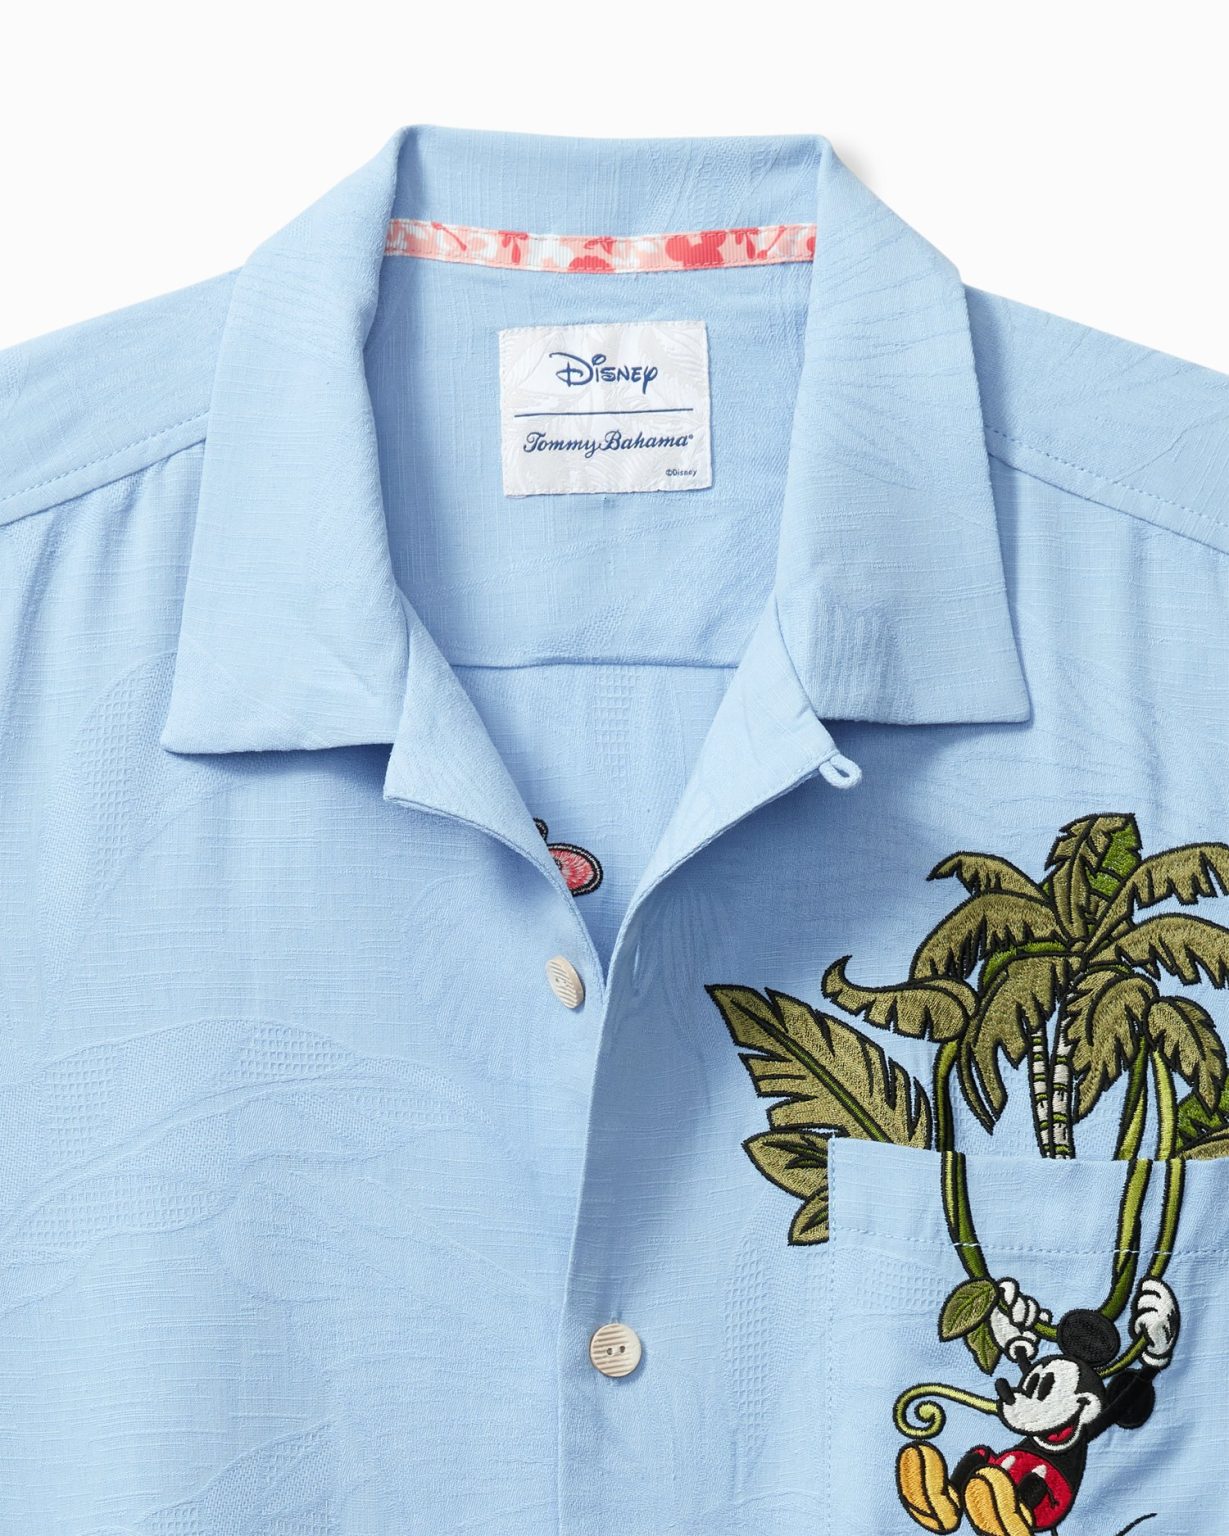 Why Disney Dads Love Tommy Bahama Shirts - AllEars.Net